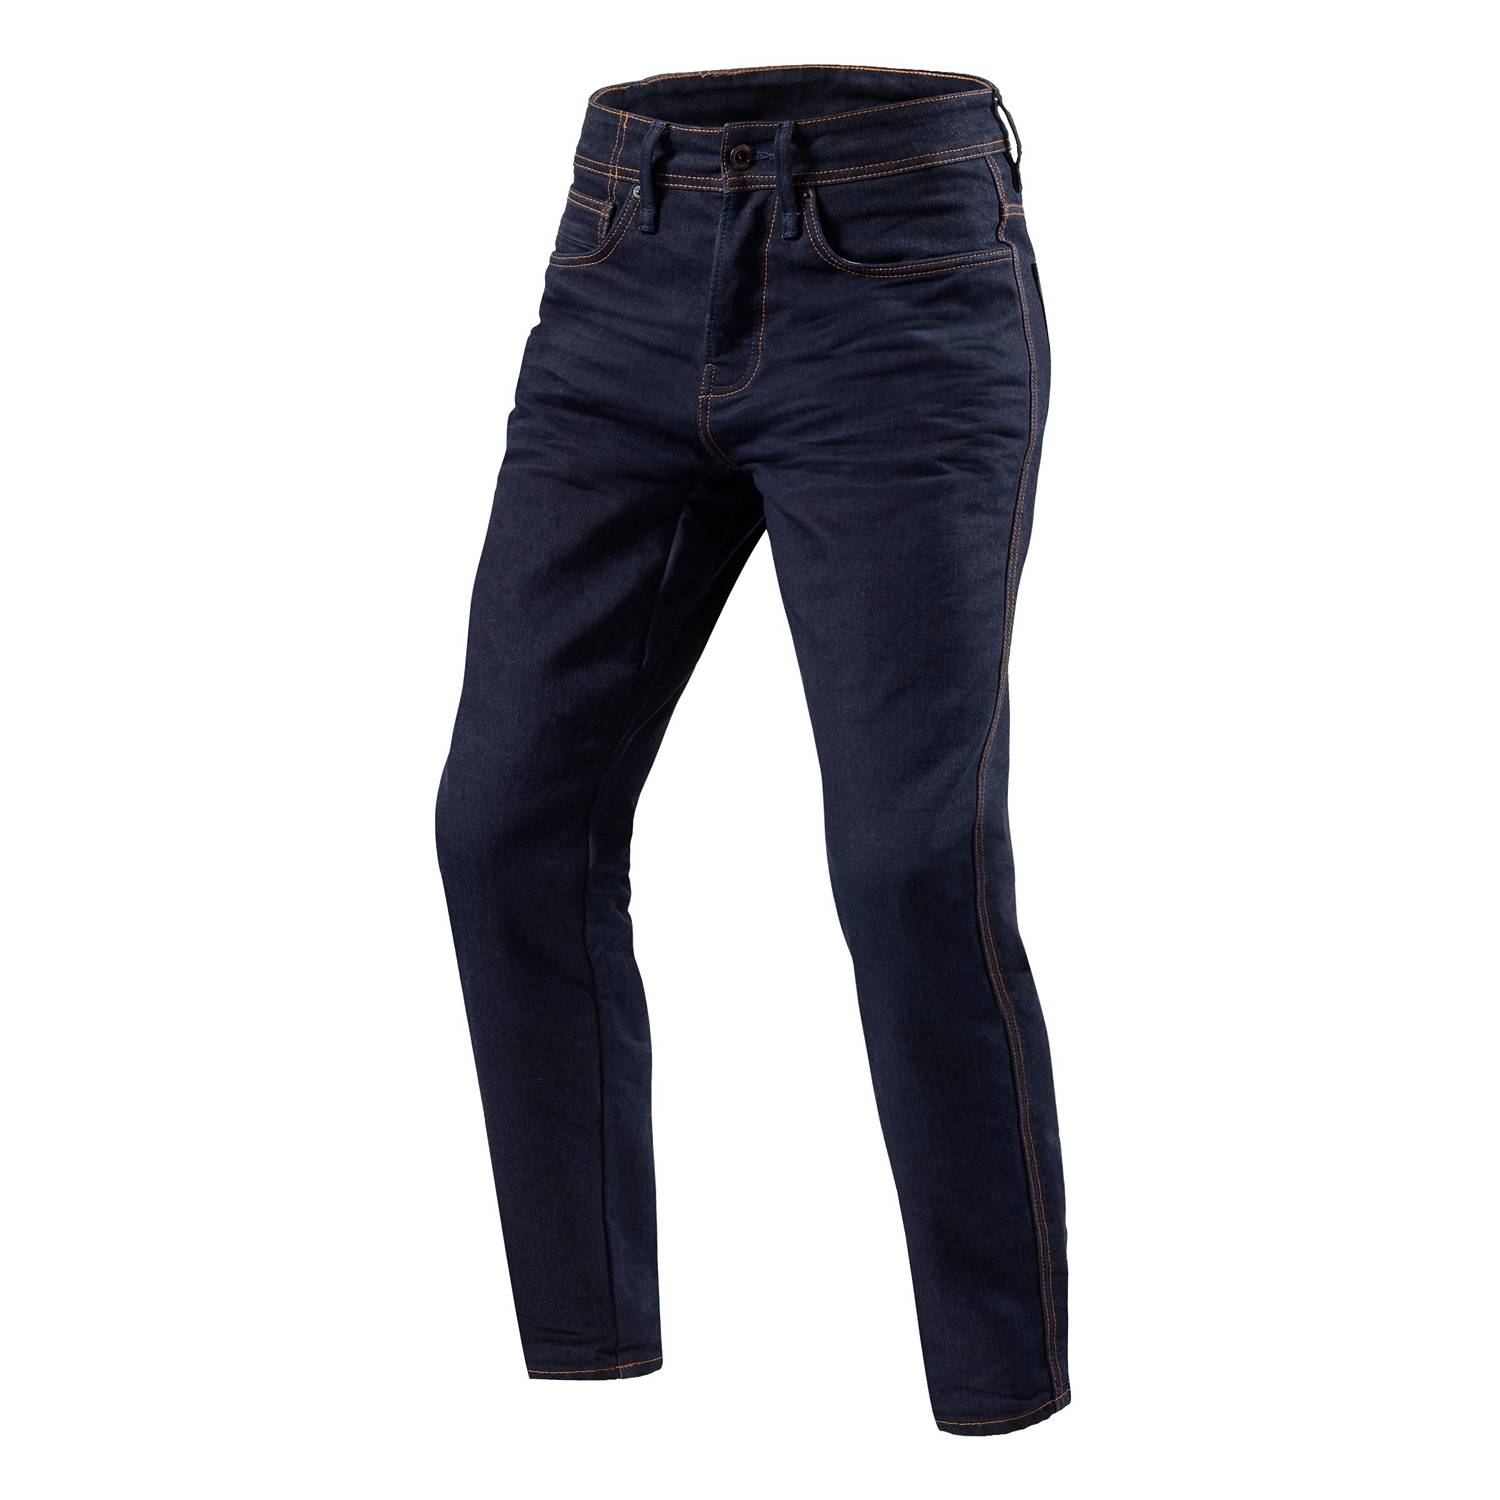 Image of REV'IT! Jeans Reed RF Dark Blue Used Motorcycle Jeans Size L32/W34 ID 8700001337014